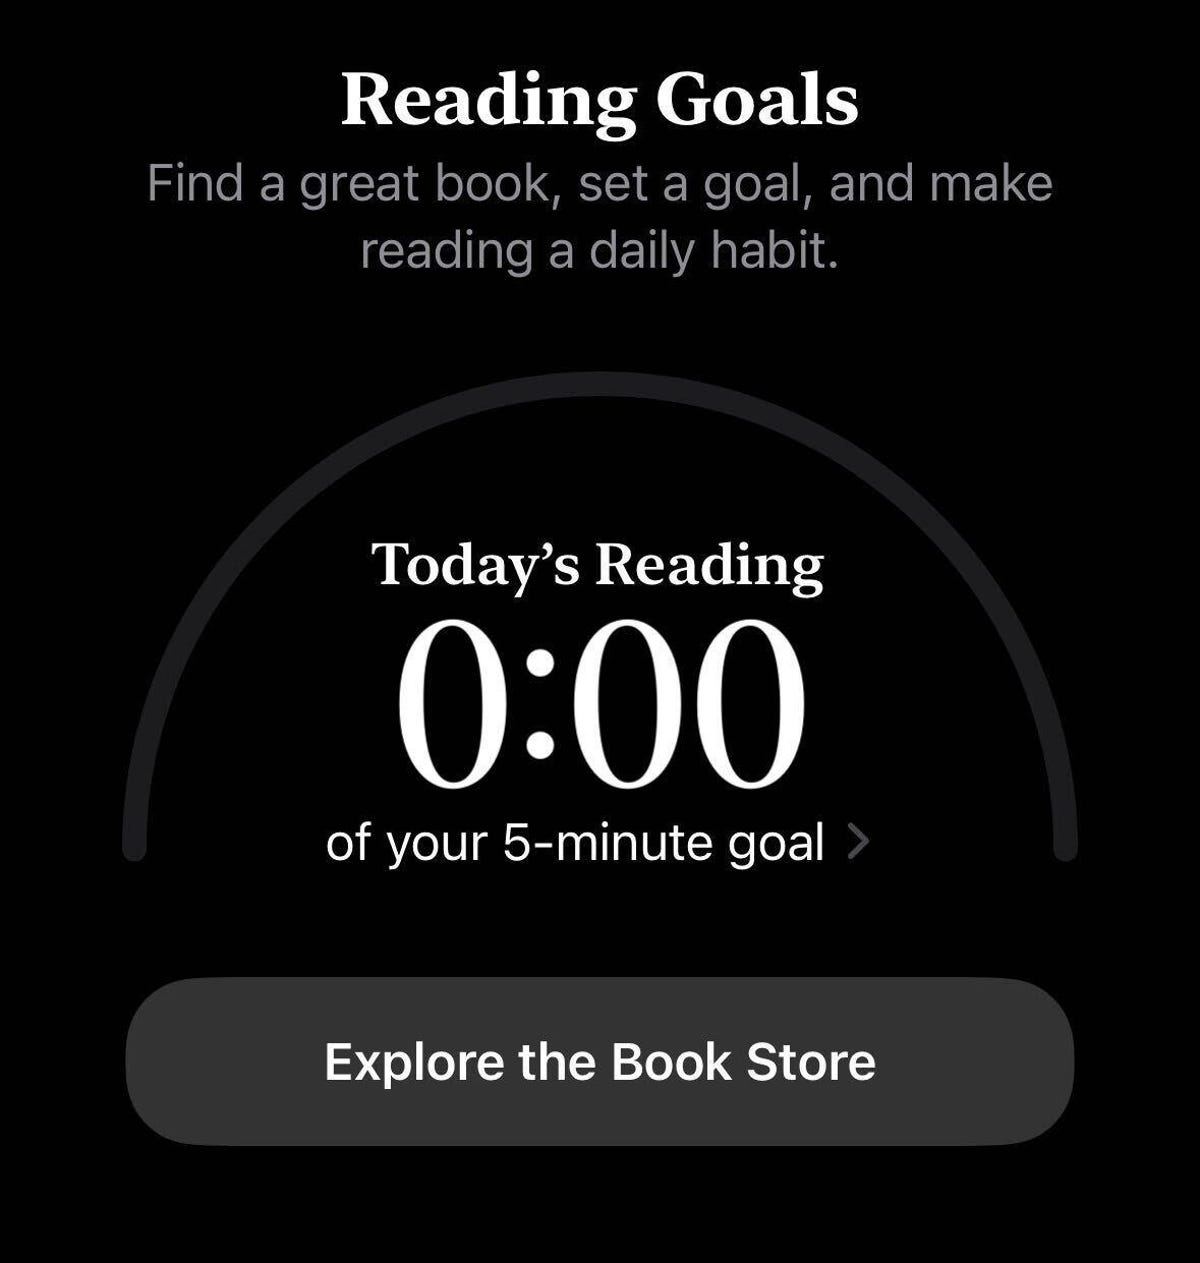 Reading Goals in the Books app